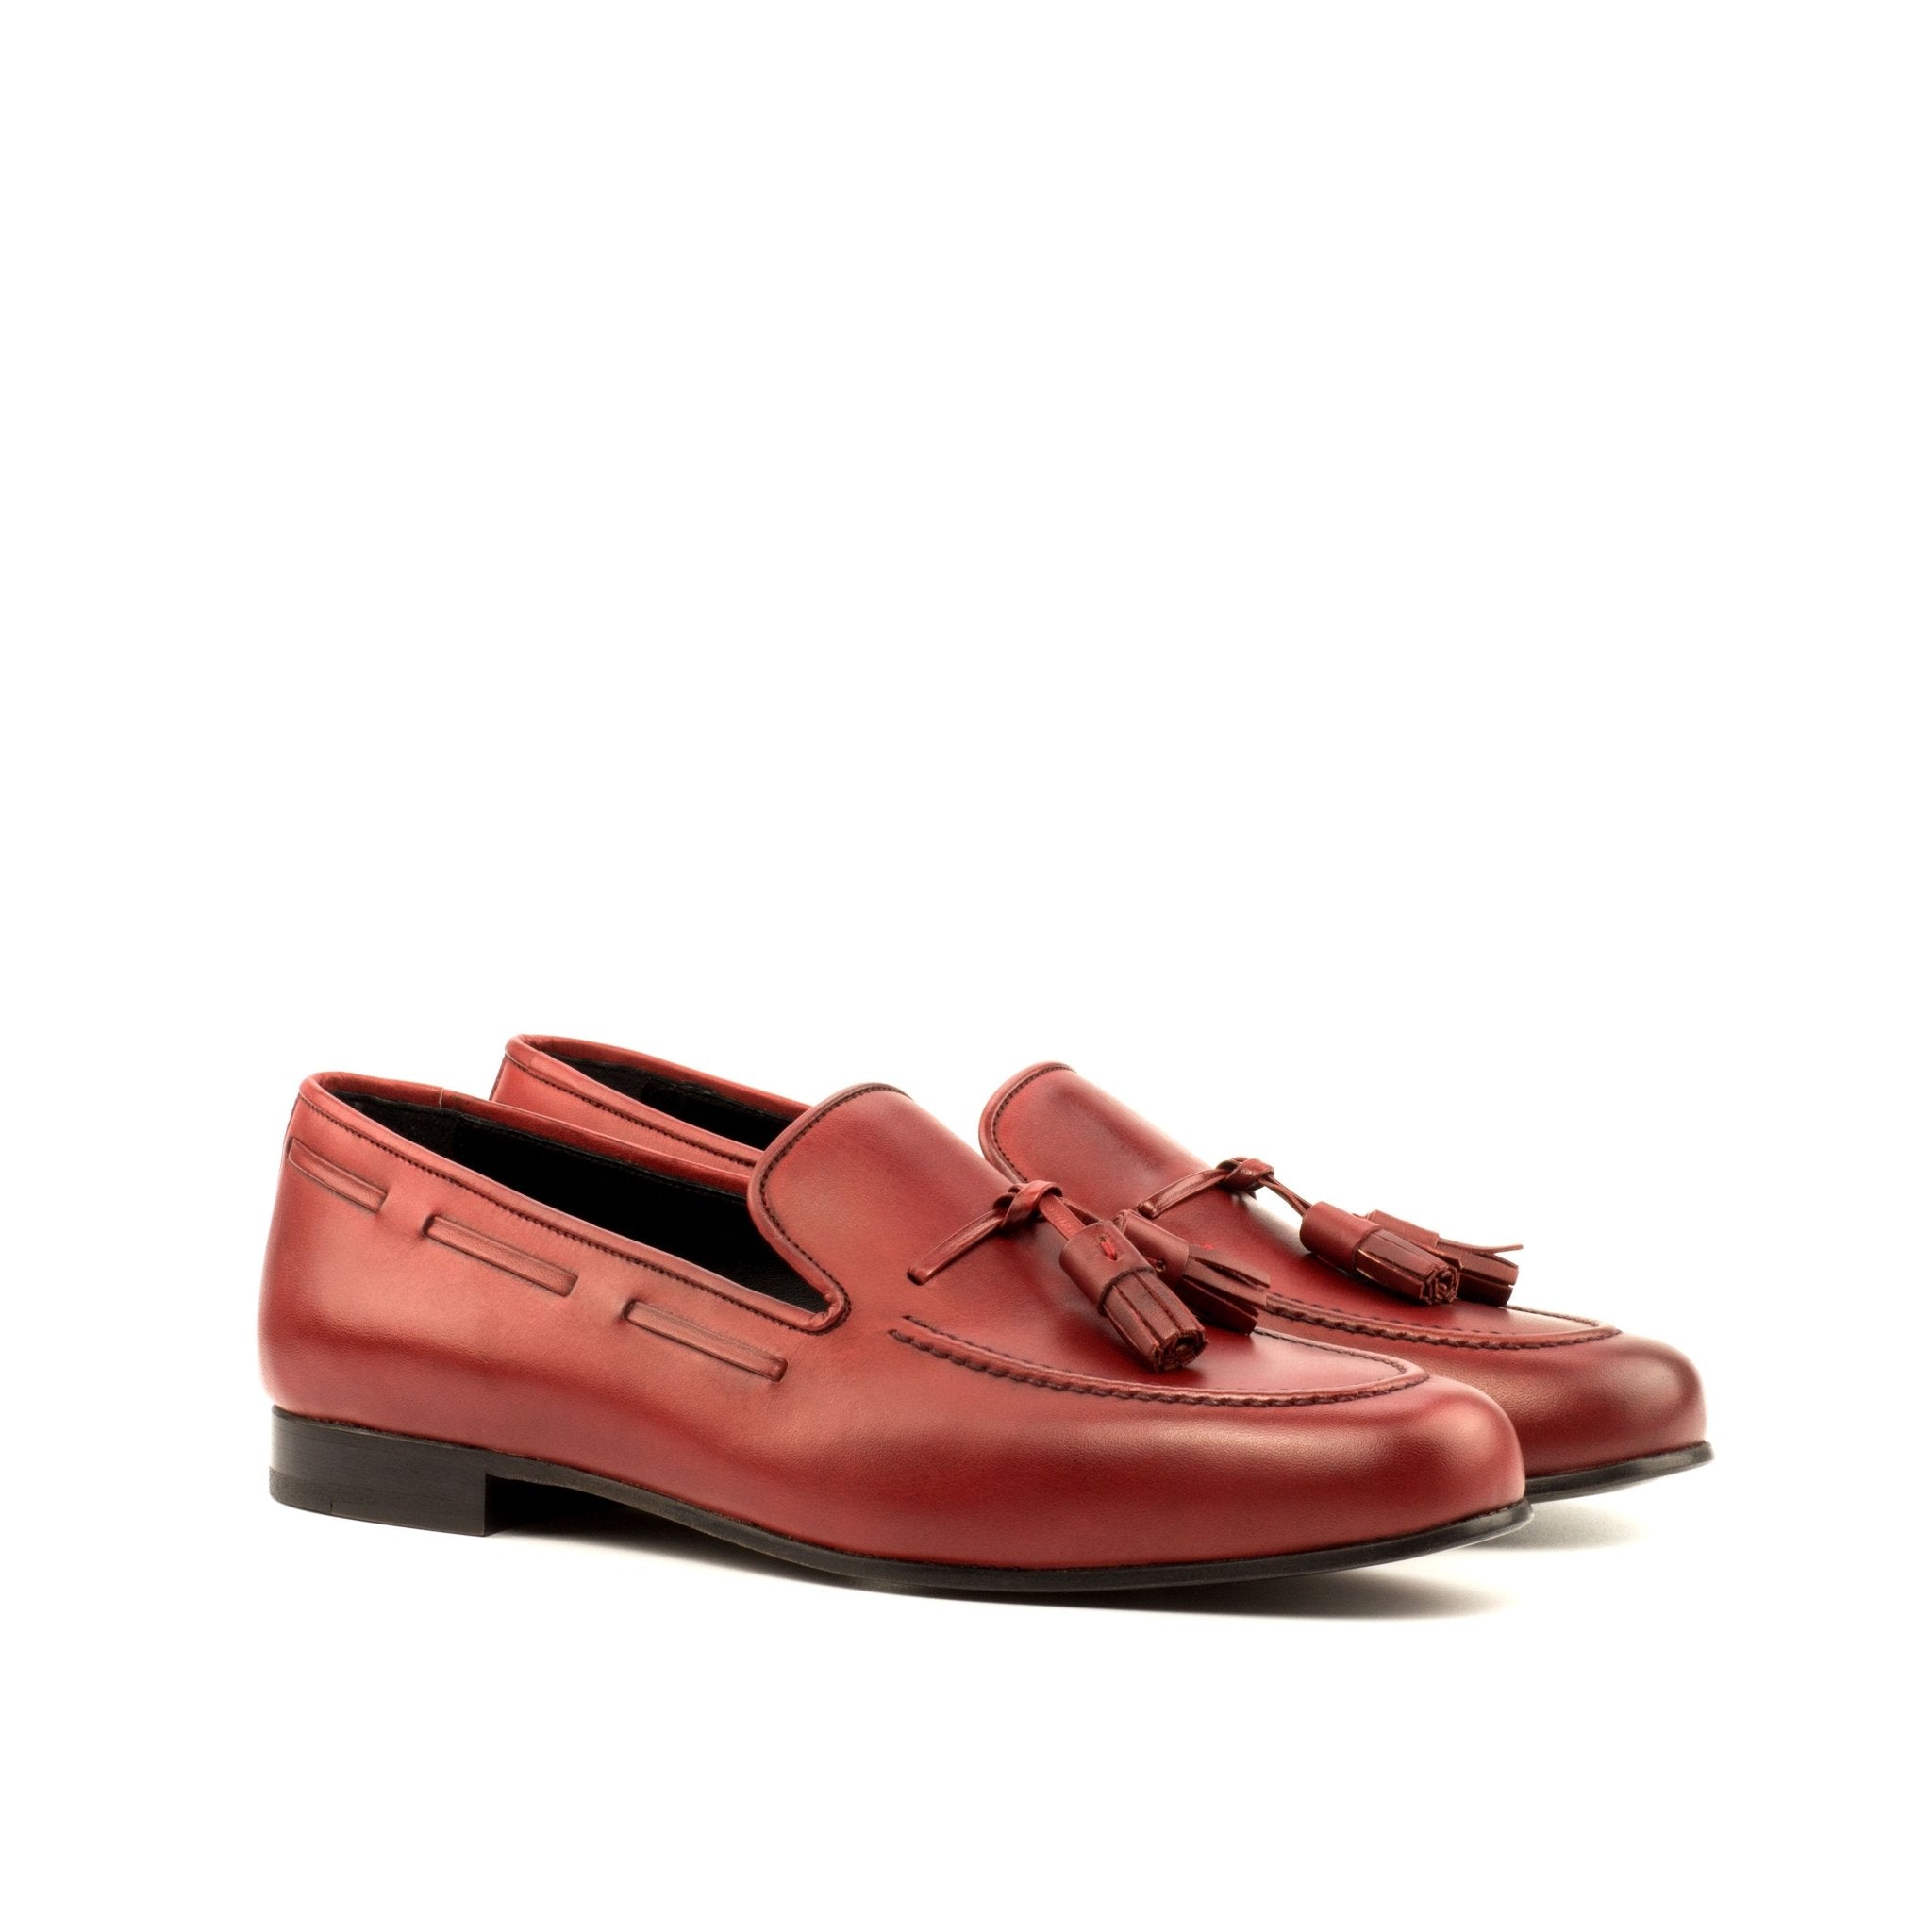 Men's Ronde Red Painted Calf Smoking Slippers with Tassels - Maison de Kingsley Couture Harmonie et Fureur Spain